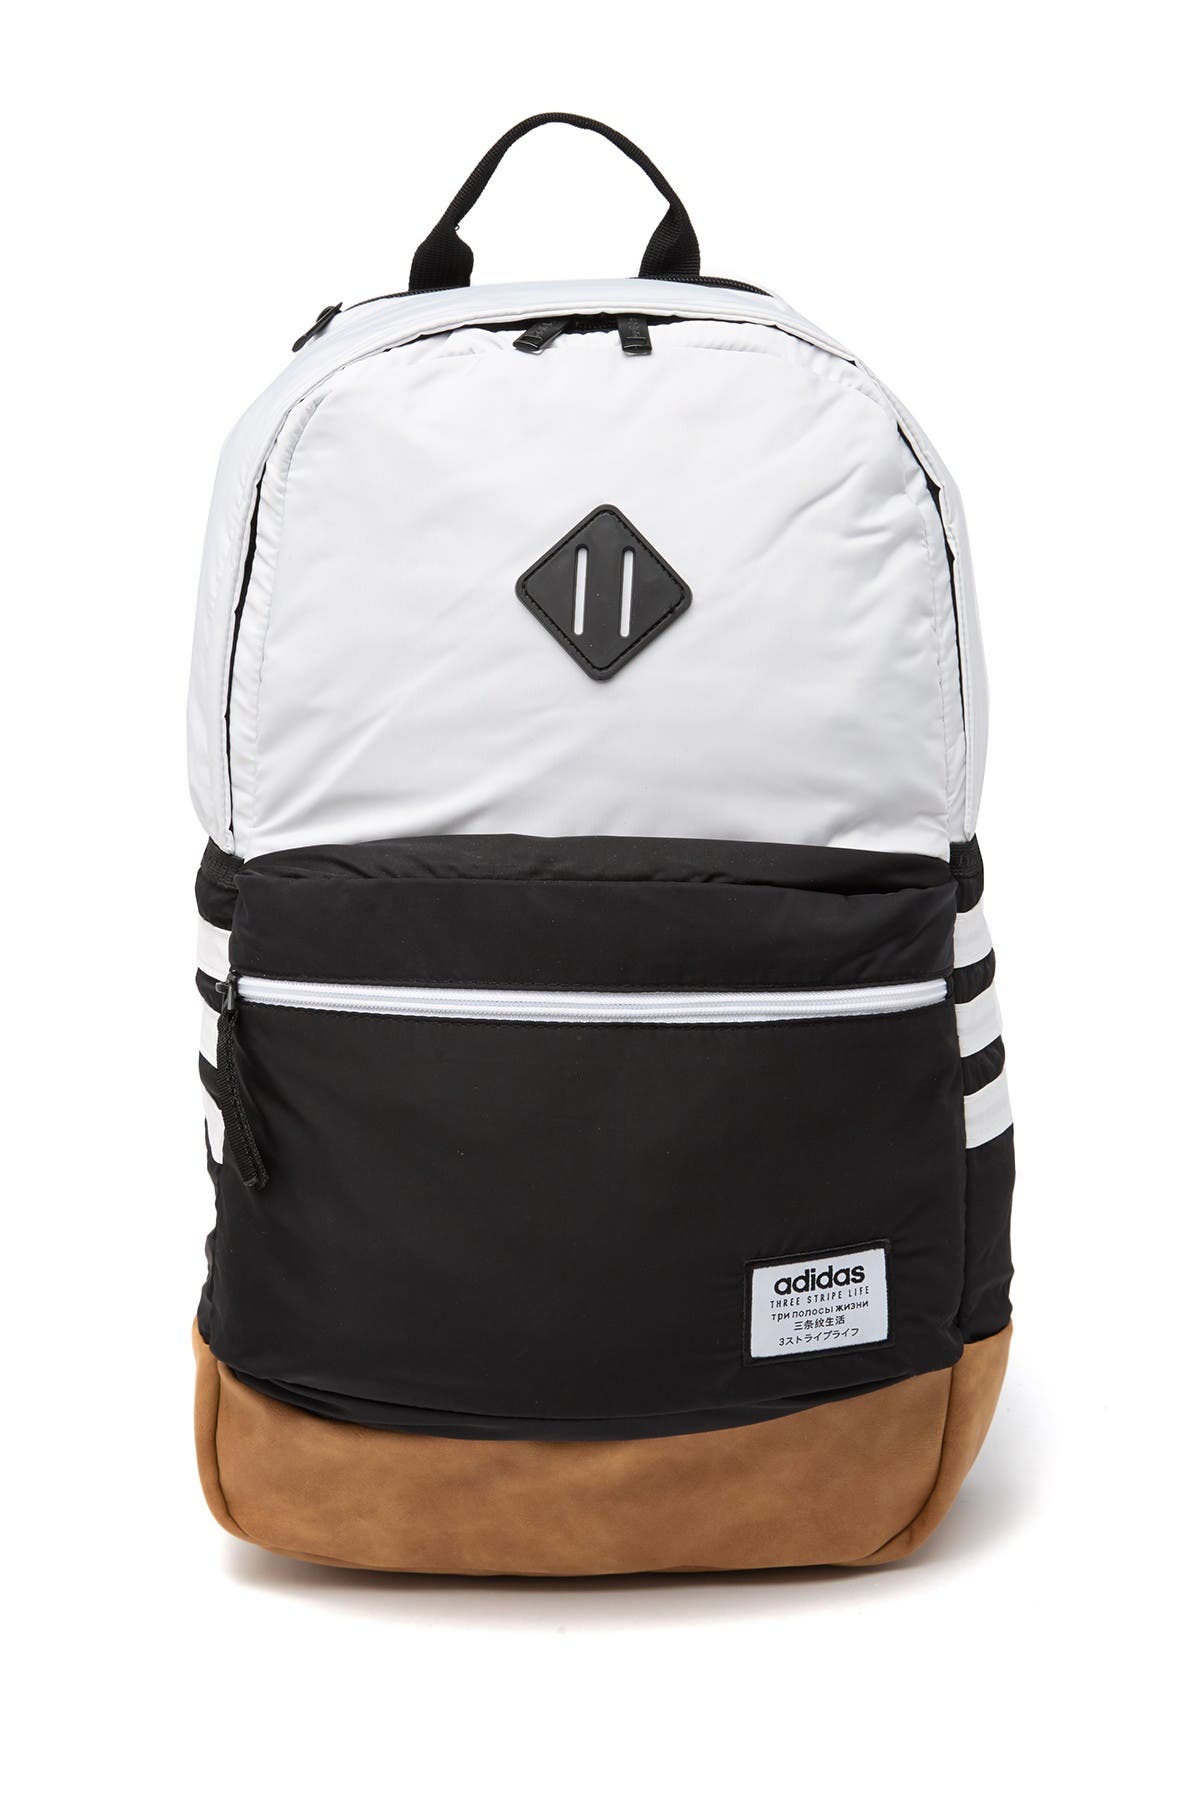 adidas | Classic 3S Plus Backpack 